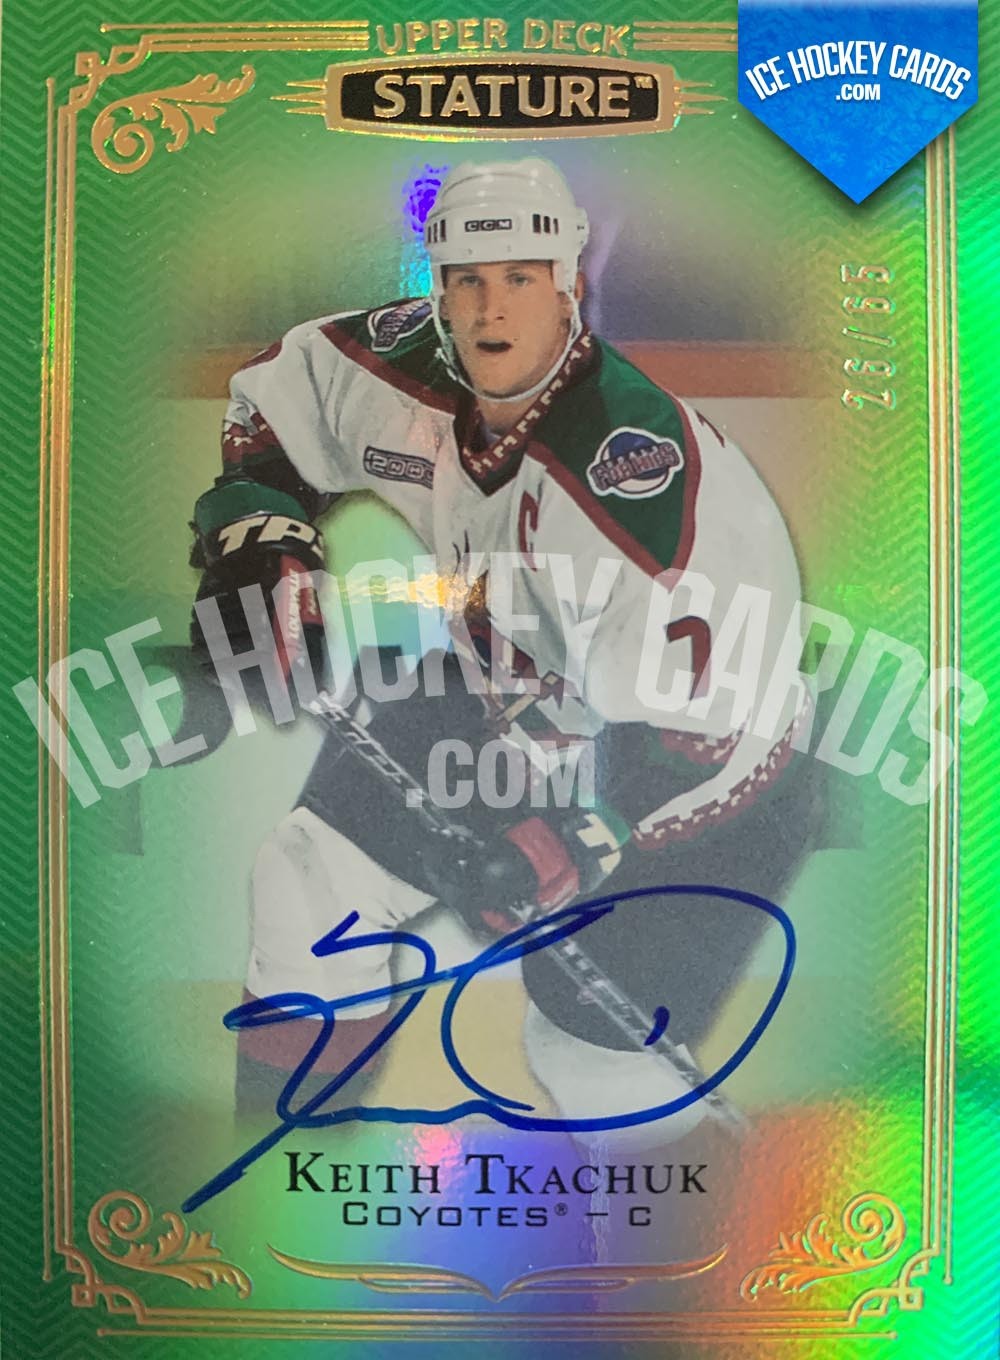 Upper Deck - Stature 2019-20 - Keith Tkachuk Autograph Card Green # to 65